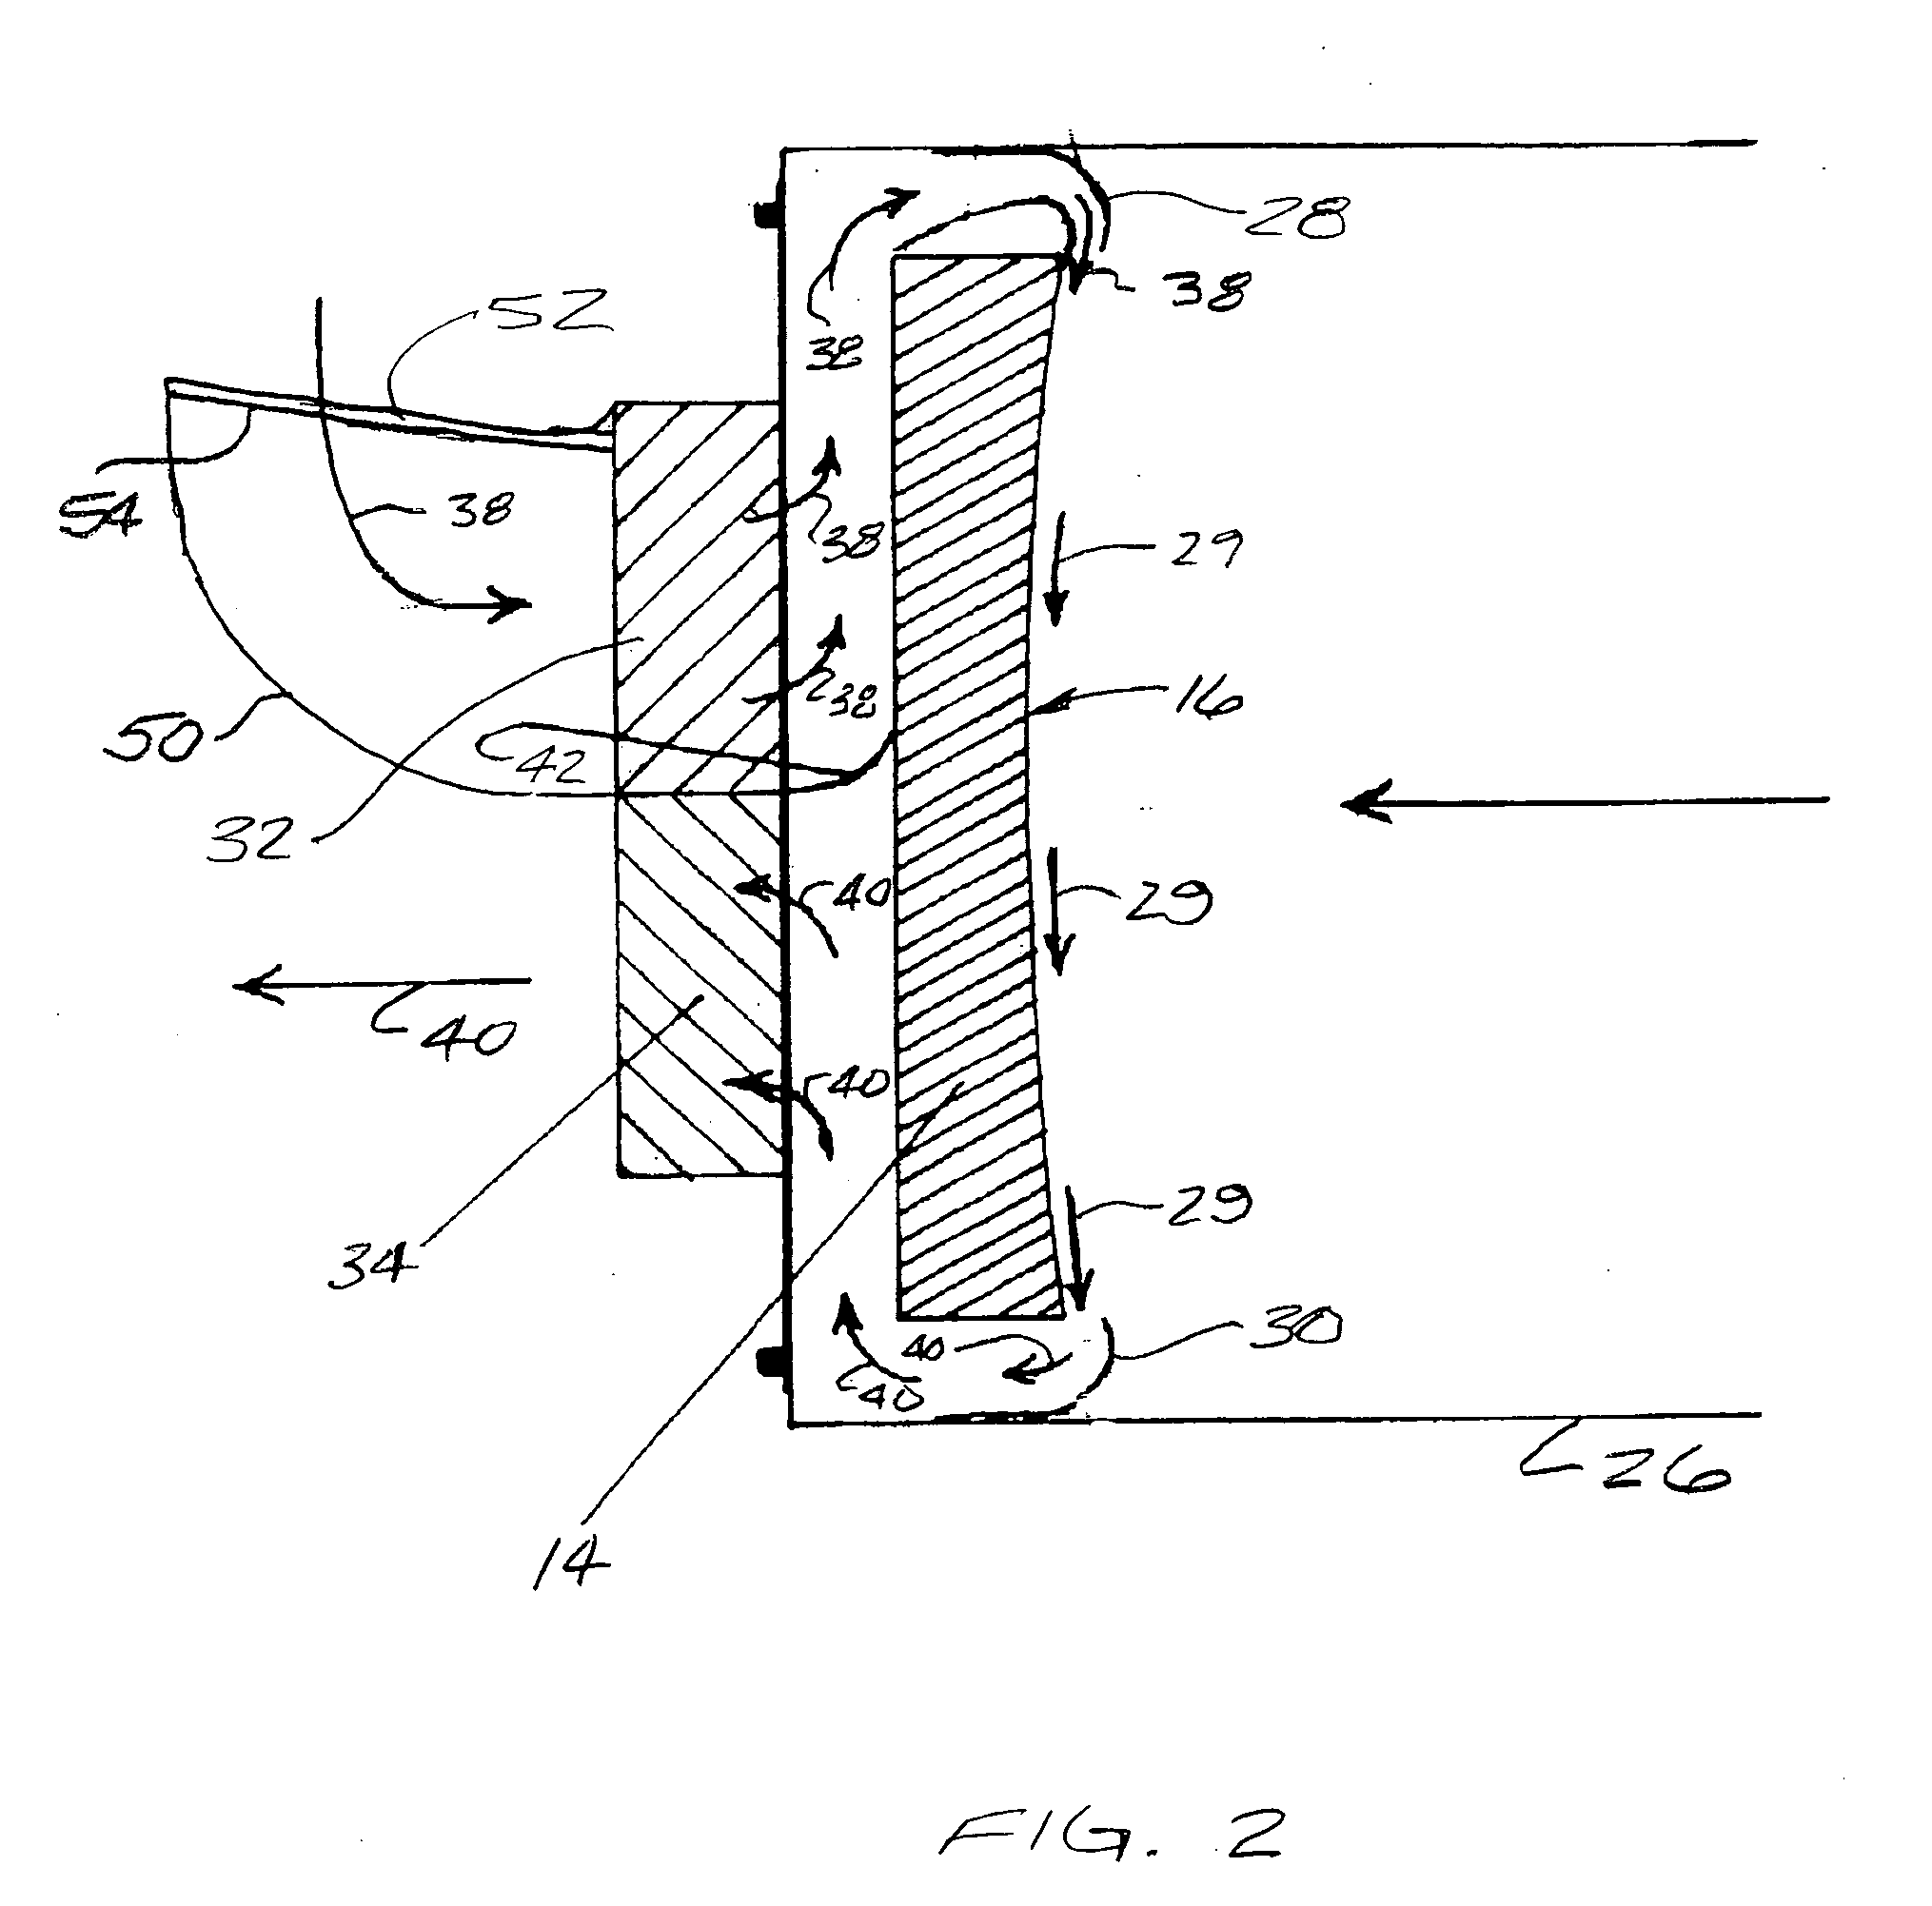 Method and apparatus for improving image quality in a reflecting telescope